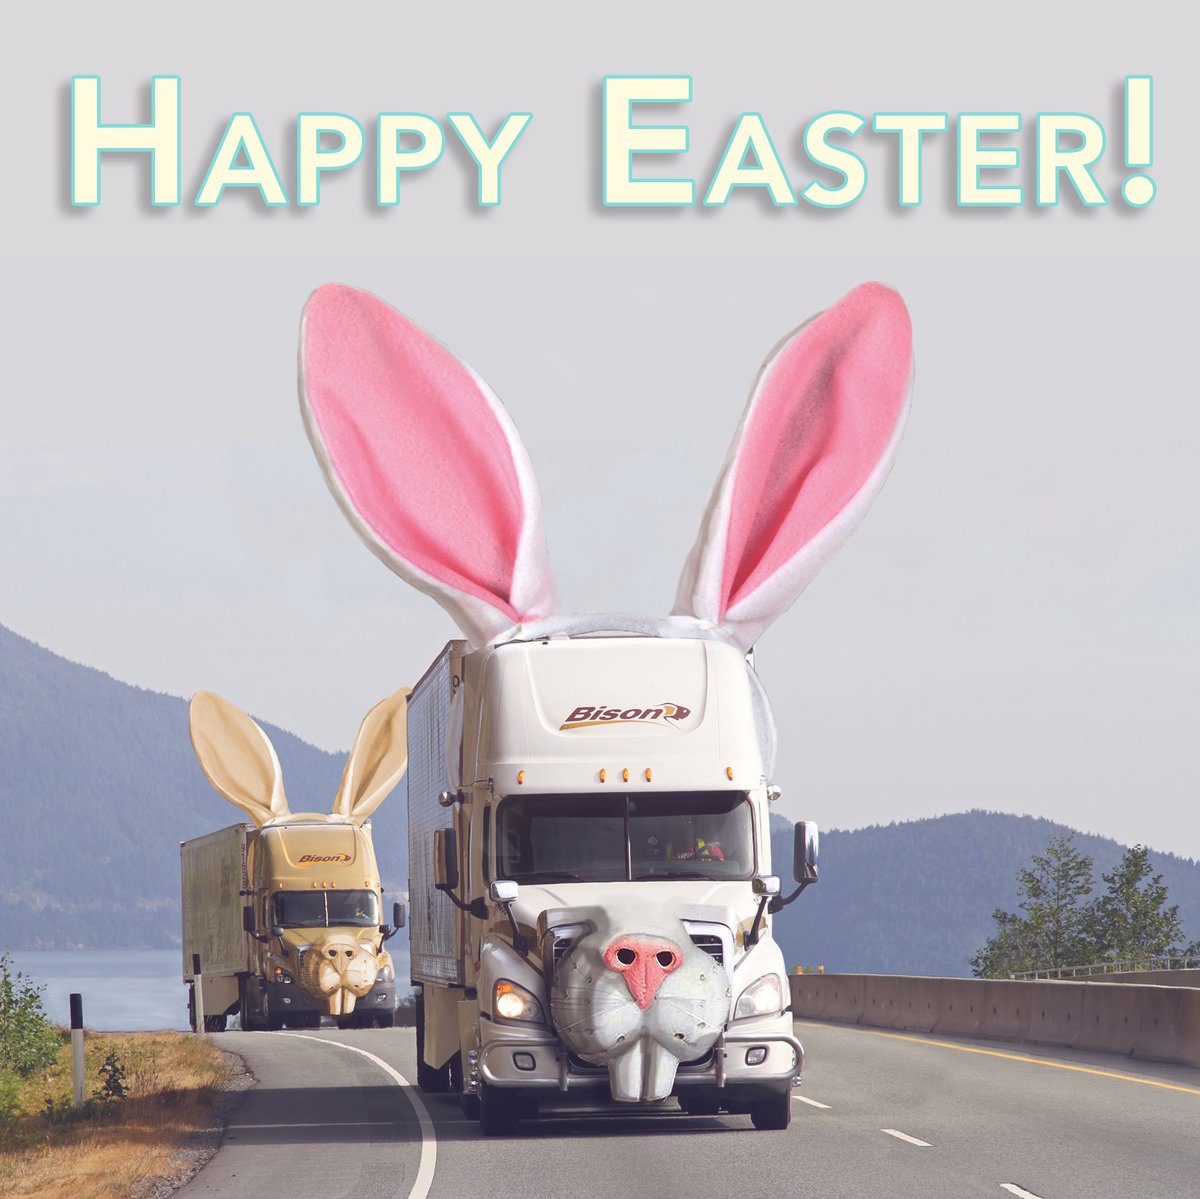 Happy Easter everyone! Wishing you a safe and happy holiday.